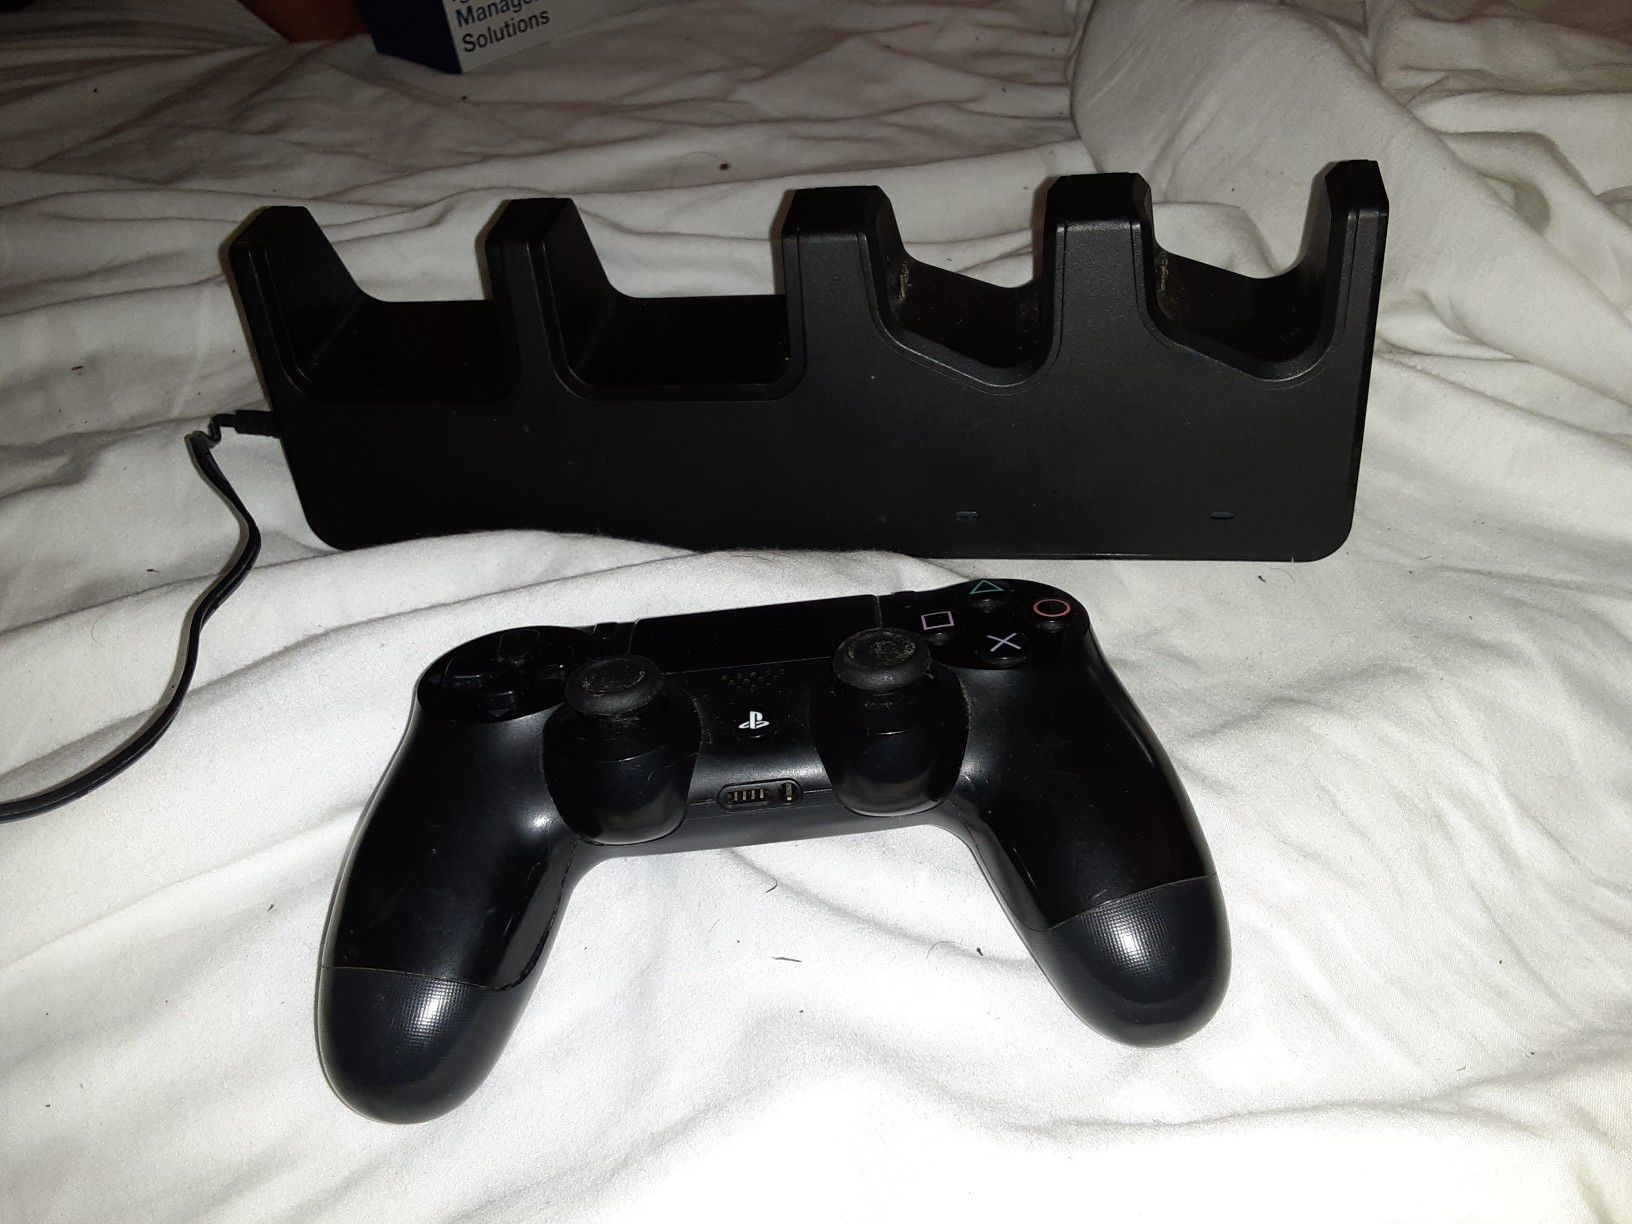 MAKE ME A OFFER!! WILLING TO NEGOCIATE PRICE! CHARGER AND CONTROLLER FOR PS4